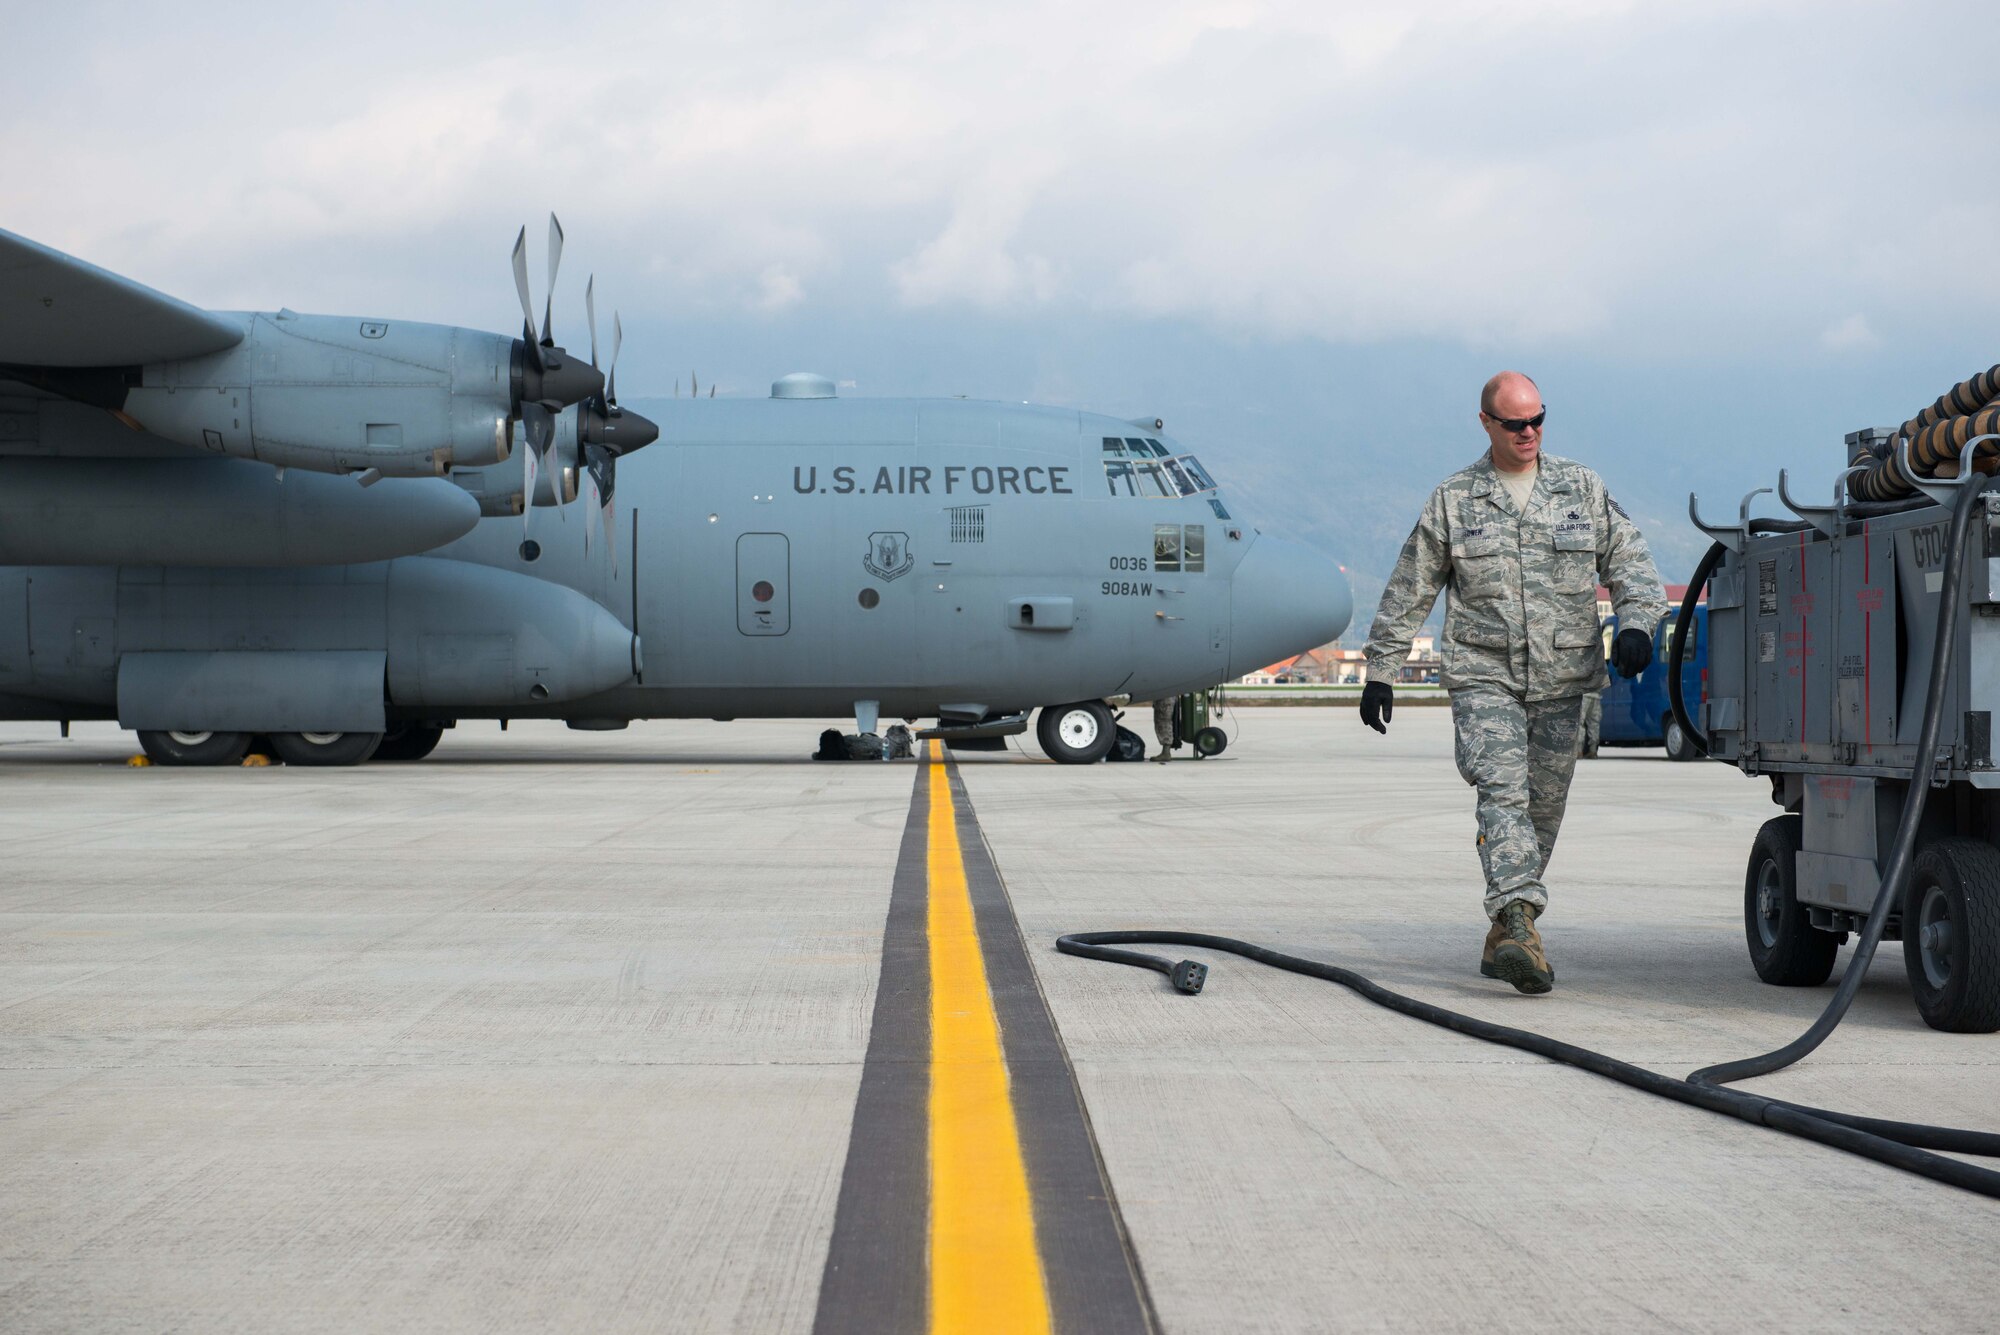 Master Sgt. Ian Owen, a crew chief from the Aircraft Maintenance Squadron, prepares the power cart of a C-130 during pre-flight preparations at Aviano AB, Italy, on 11 April, as a part of Exercise Saber Junction. (U.S. Air Force photo by Staff Sgt. Trevor Saylor)